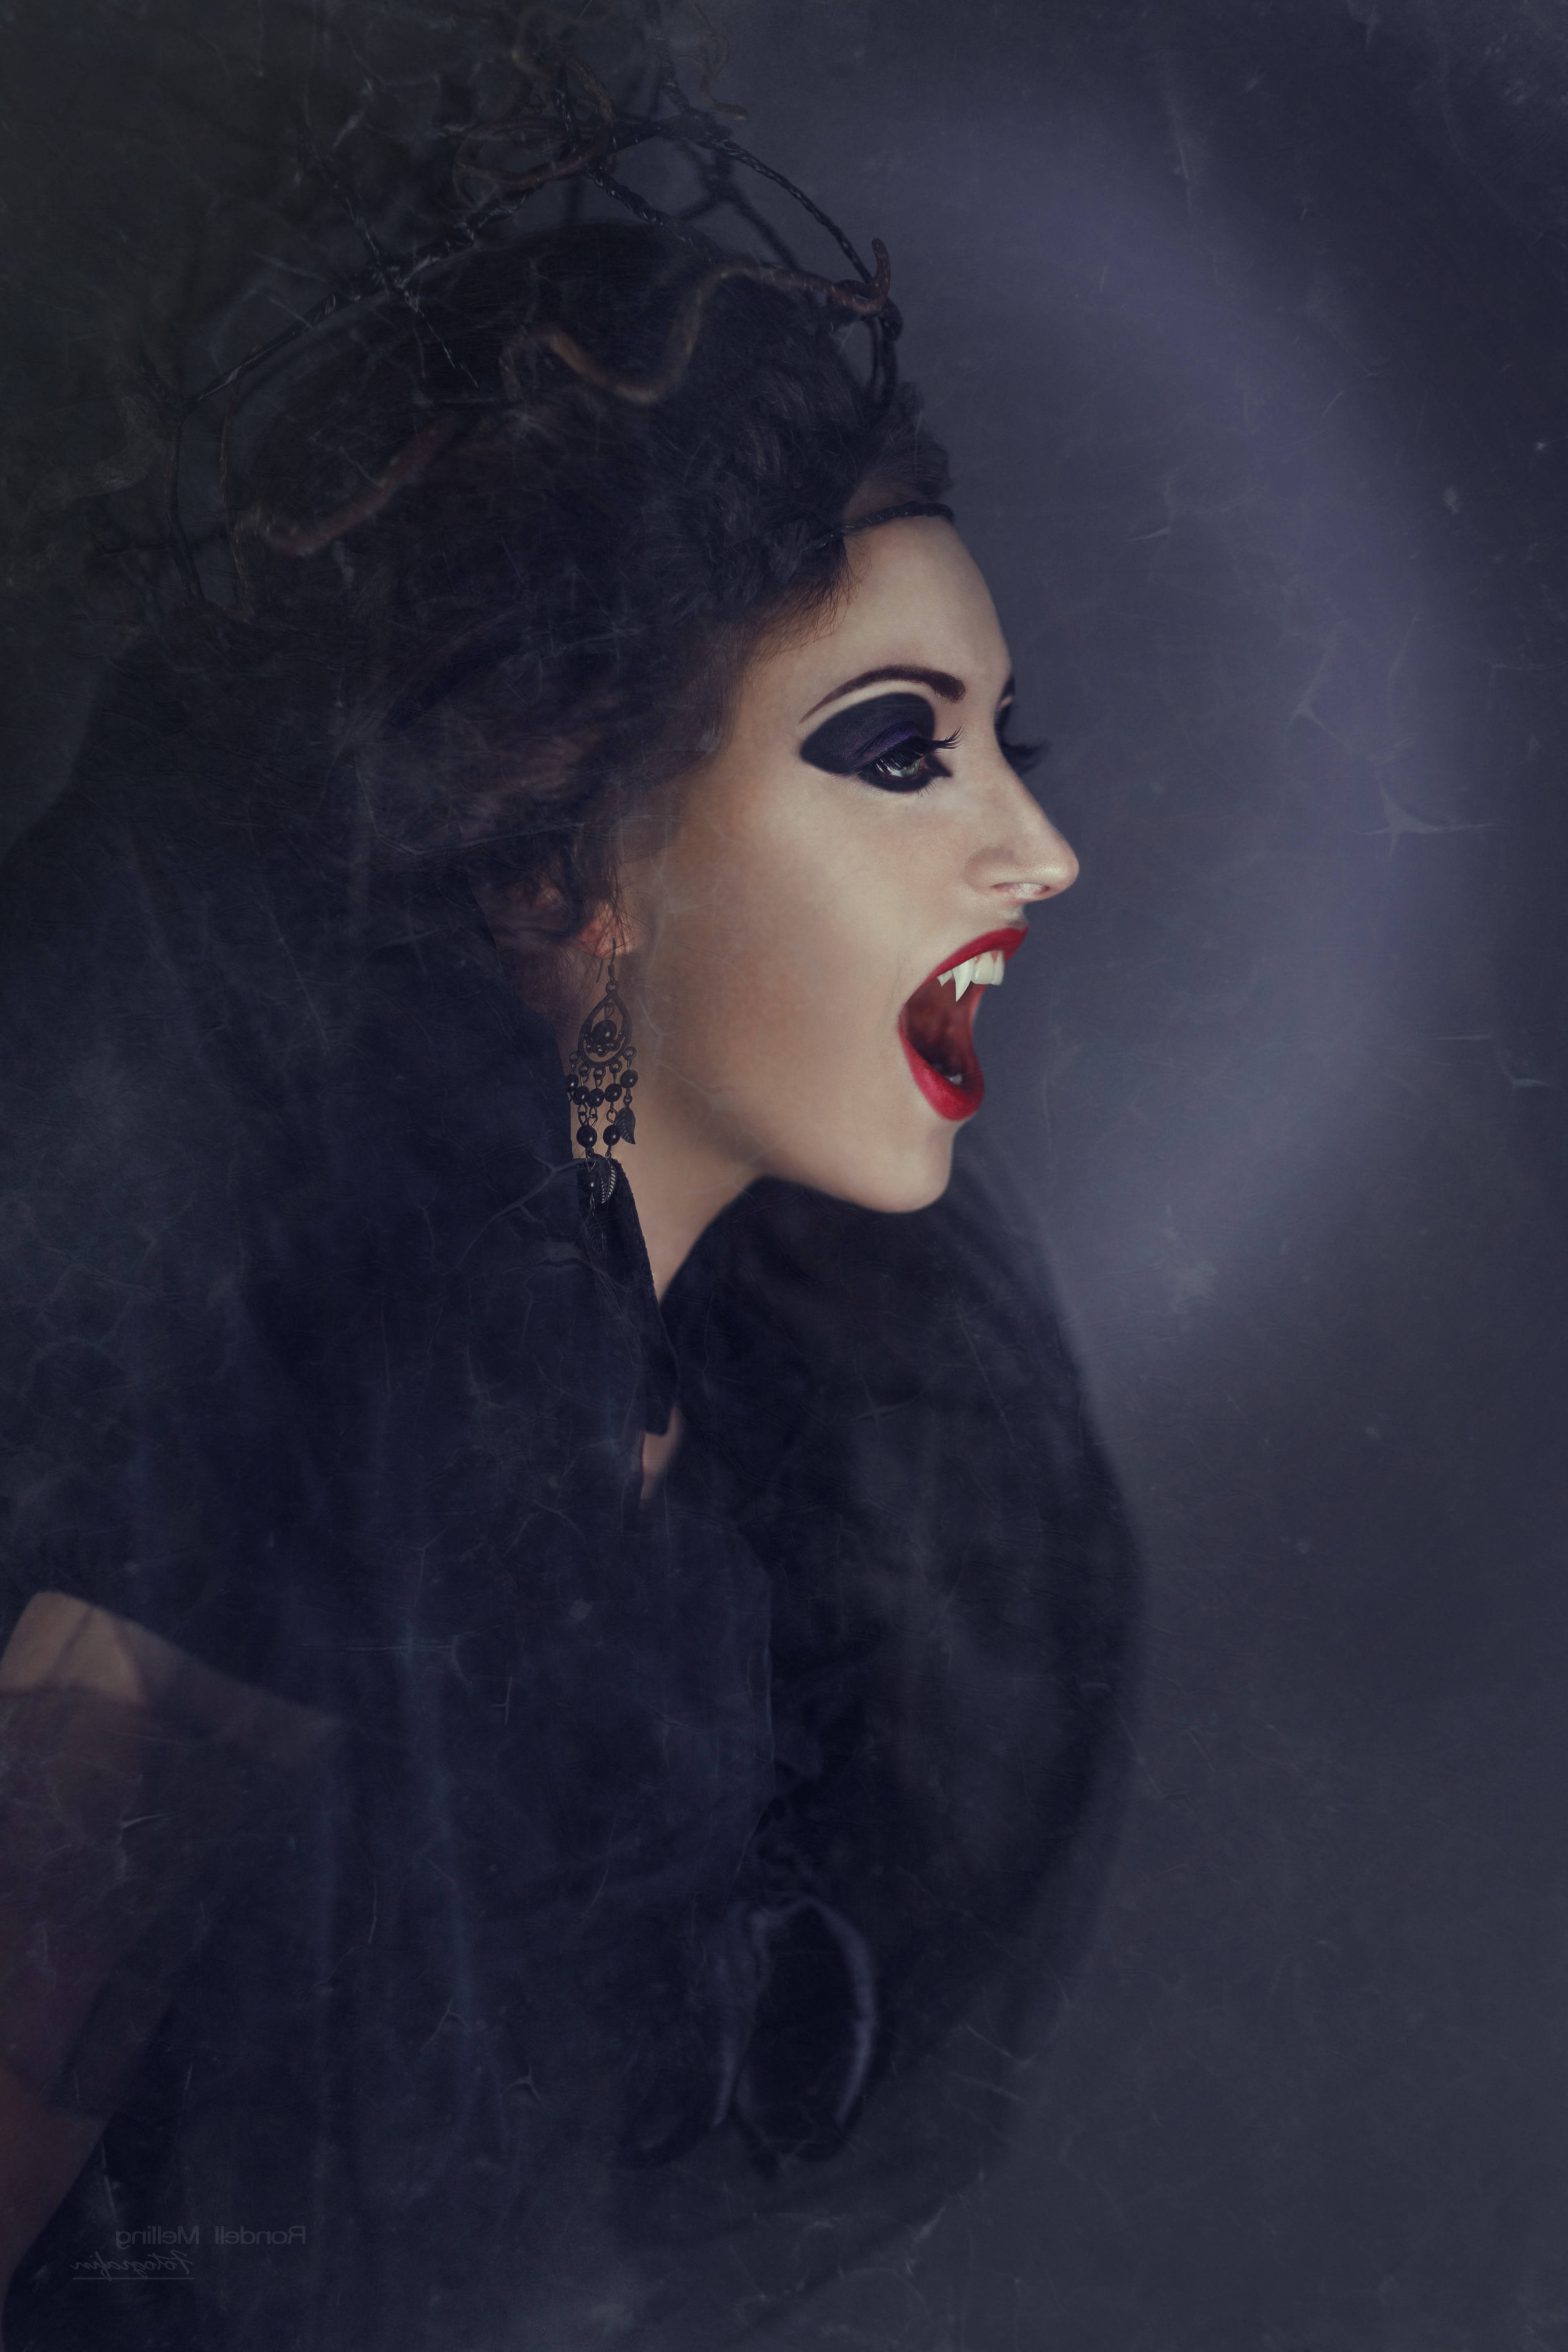 Vampires: The truth behind the myth